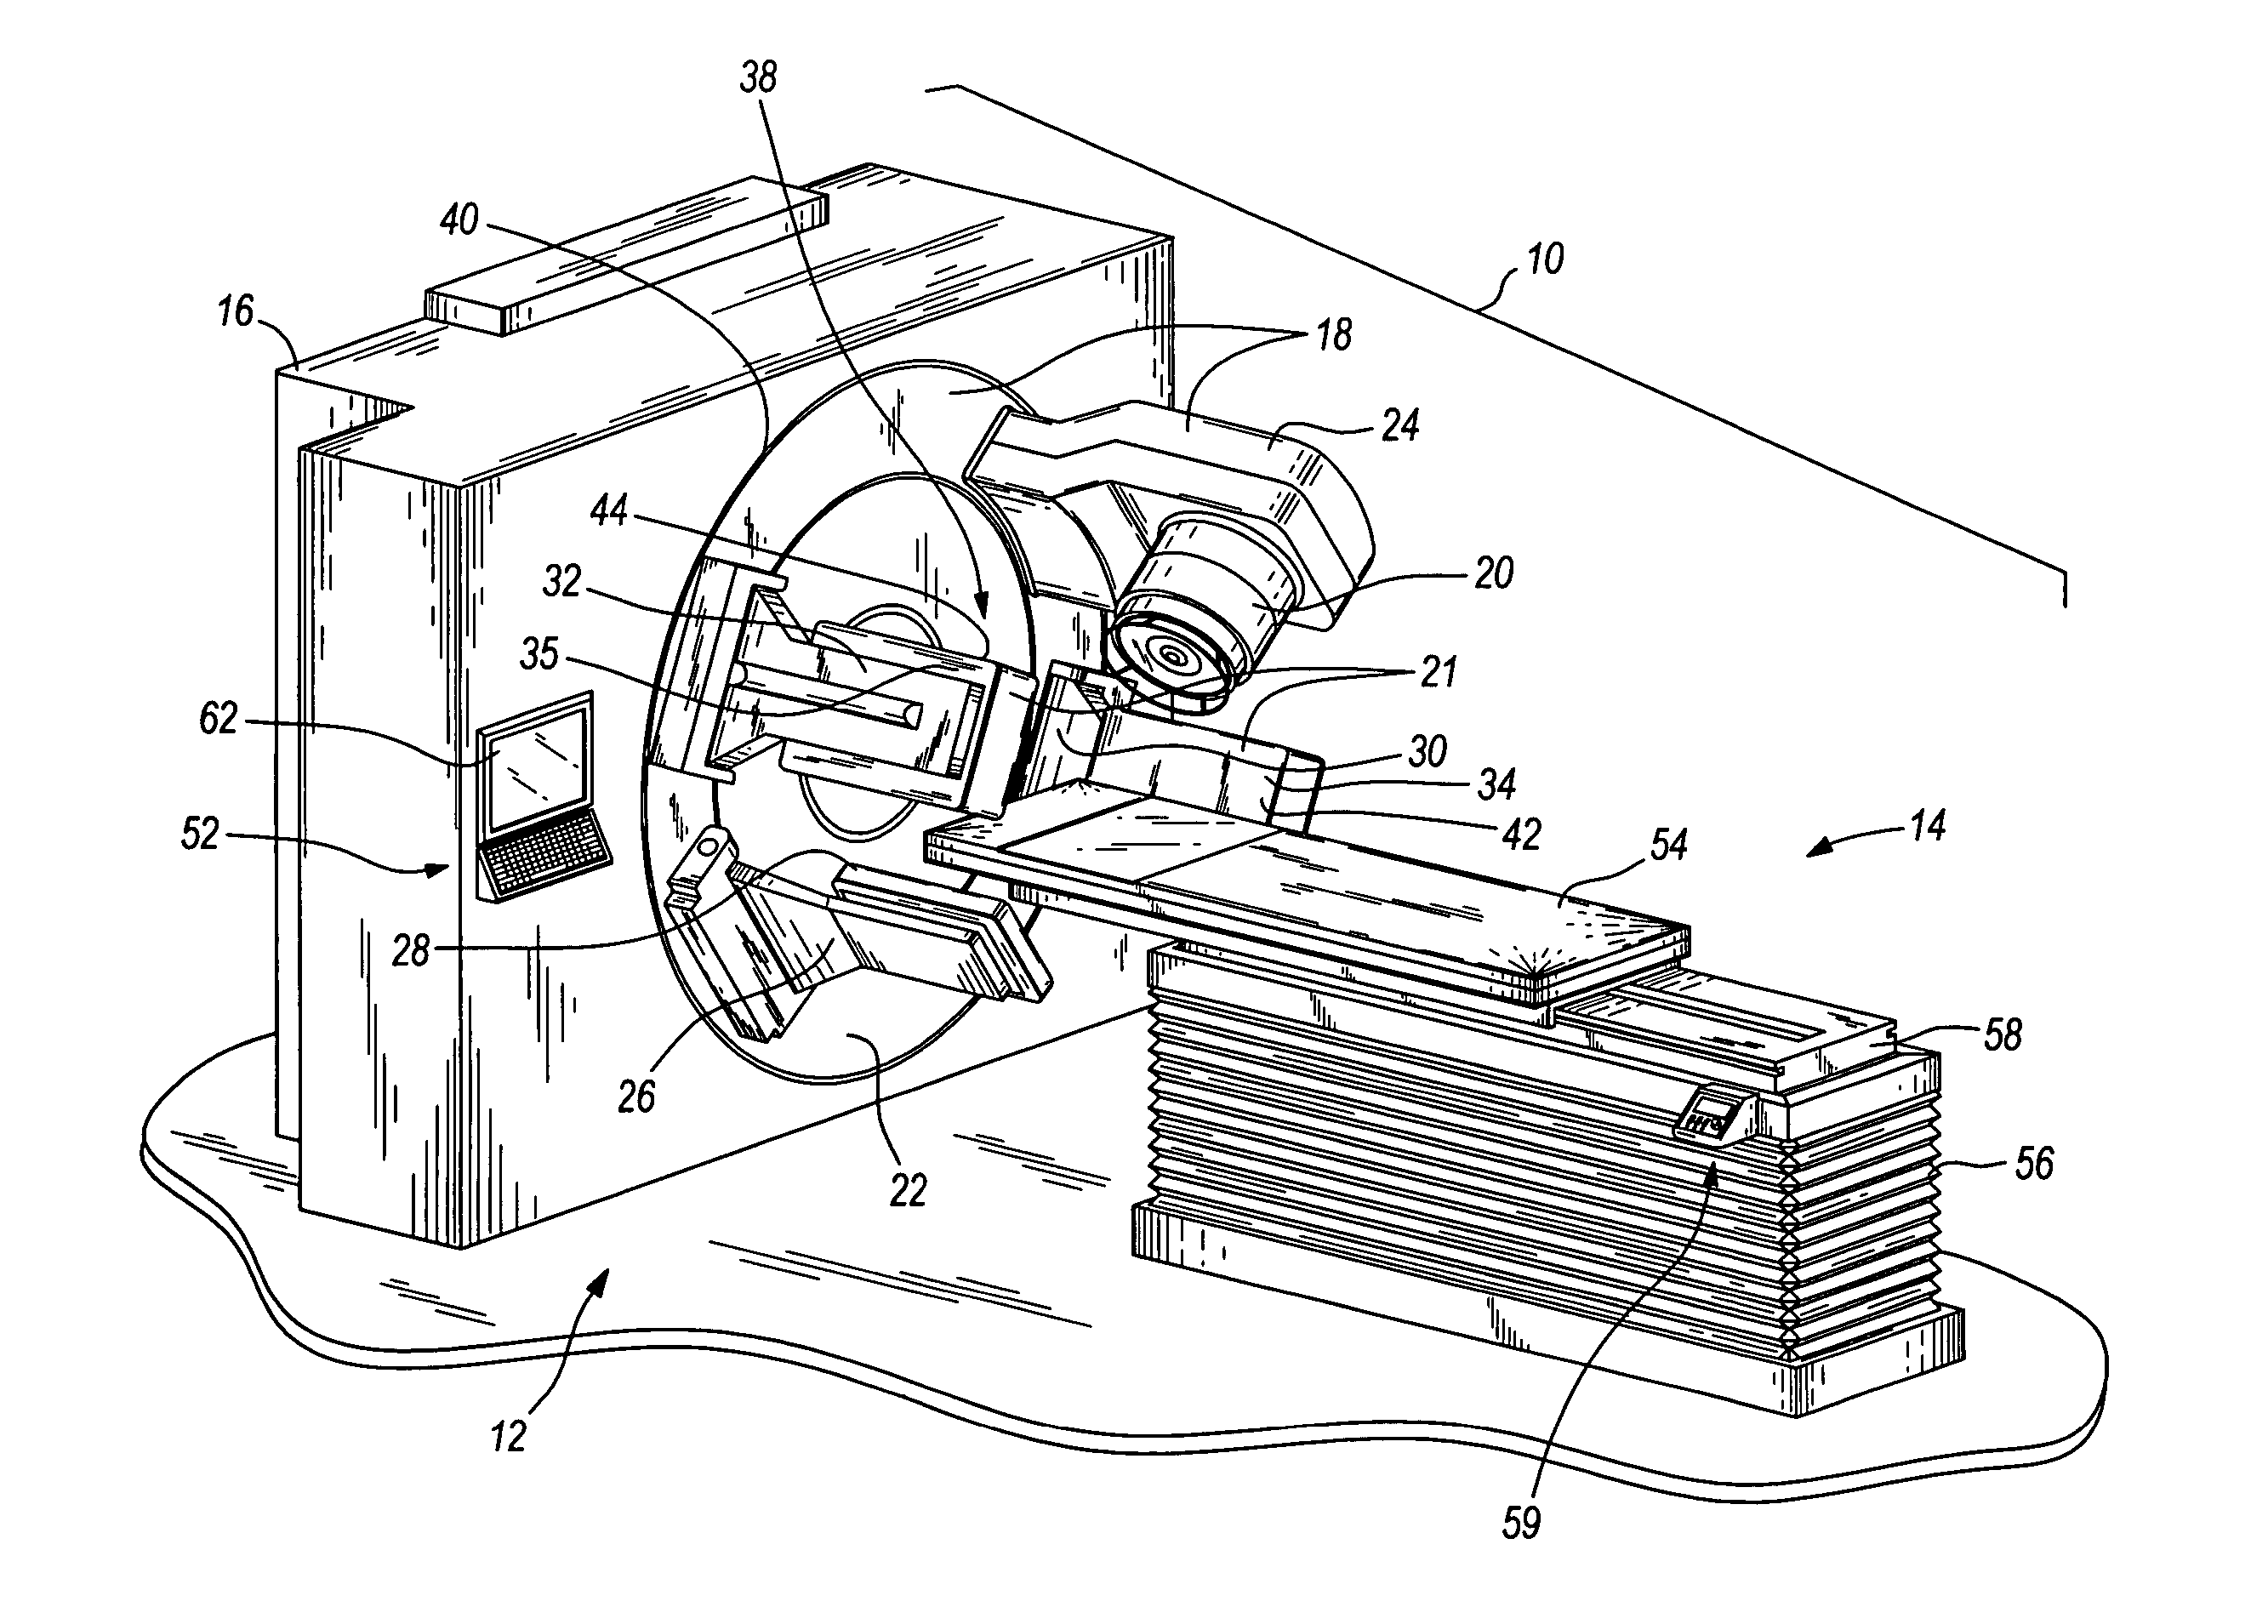 Image-guided medical intervention apparatus and method